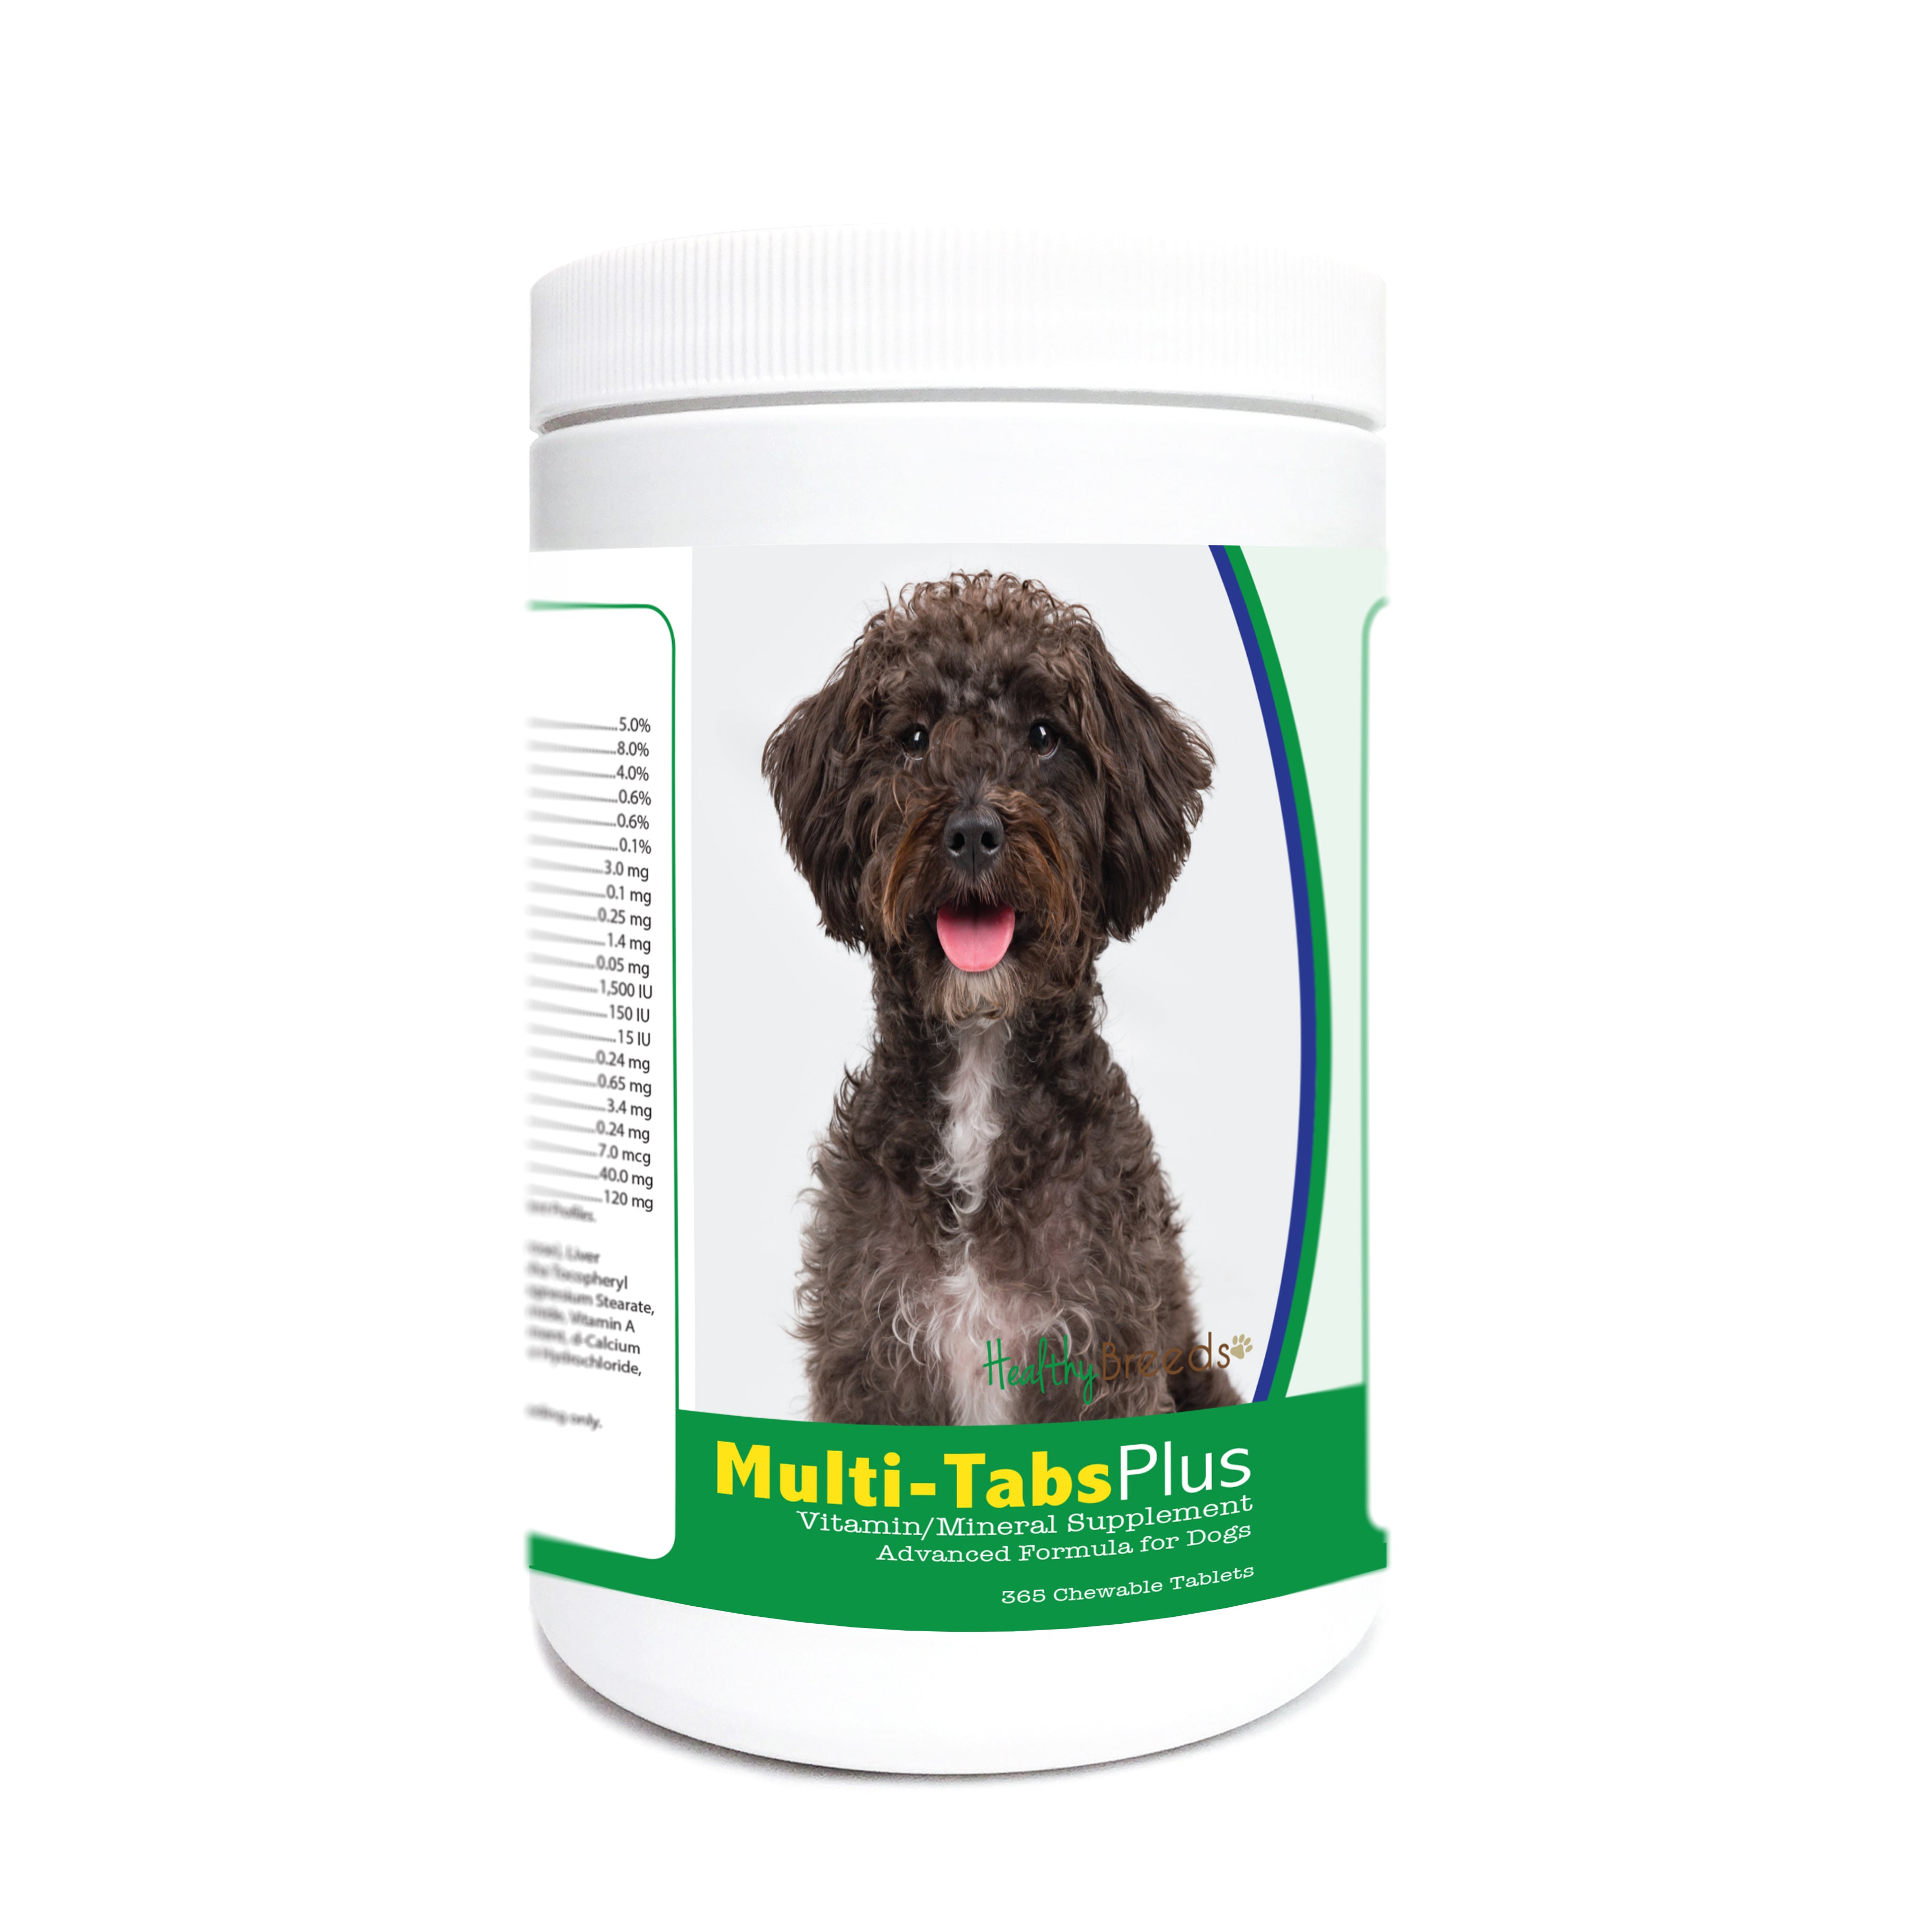 Schnoodle Multi-Tabs Plus Chewable Tablets 365 Count